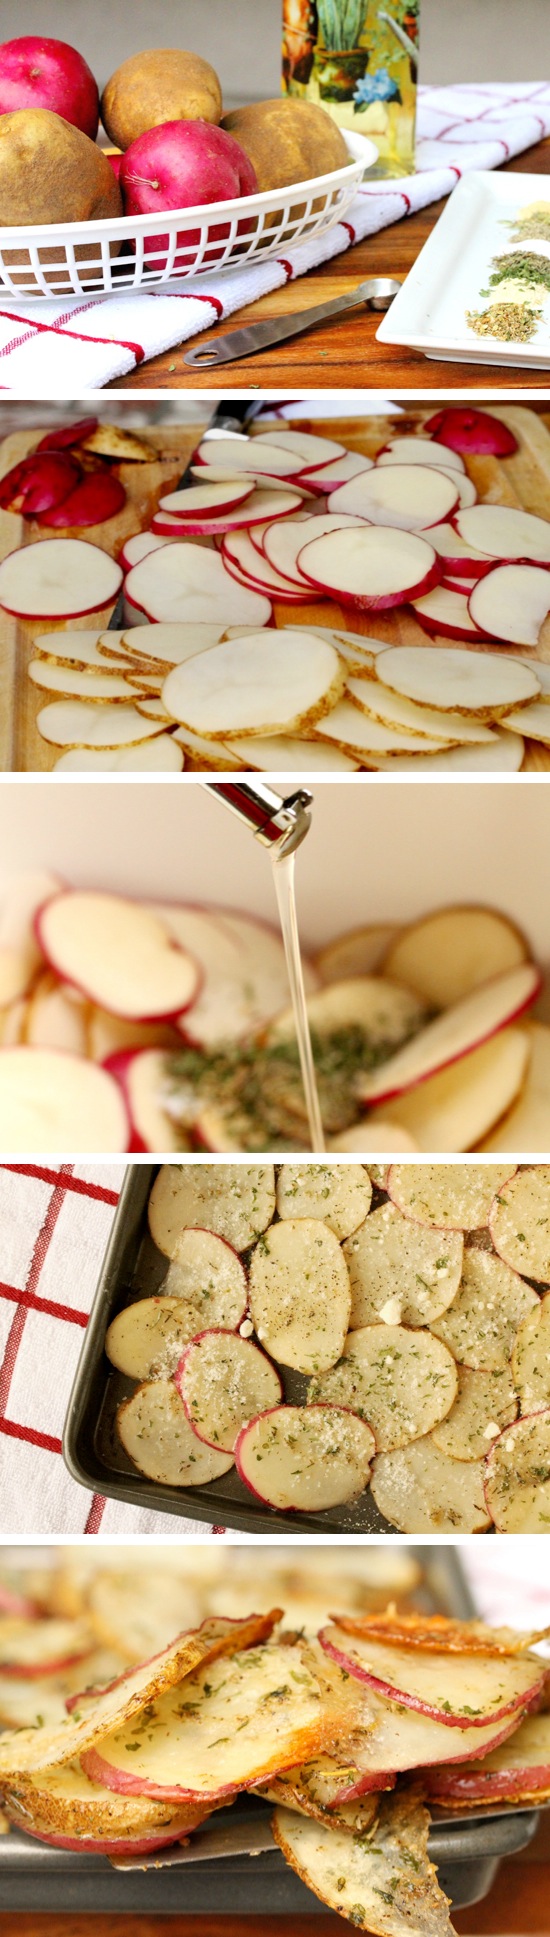 Baked-Herb-and-Parmesan-Potato-Slices